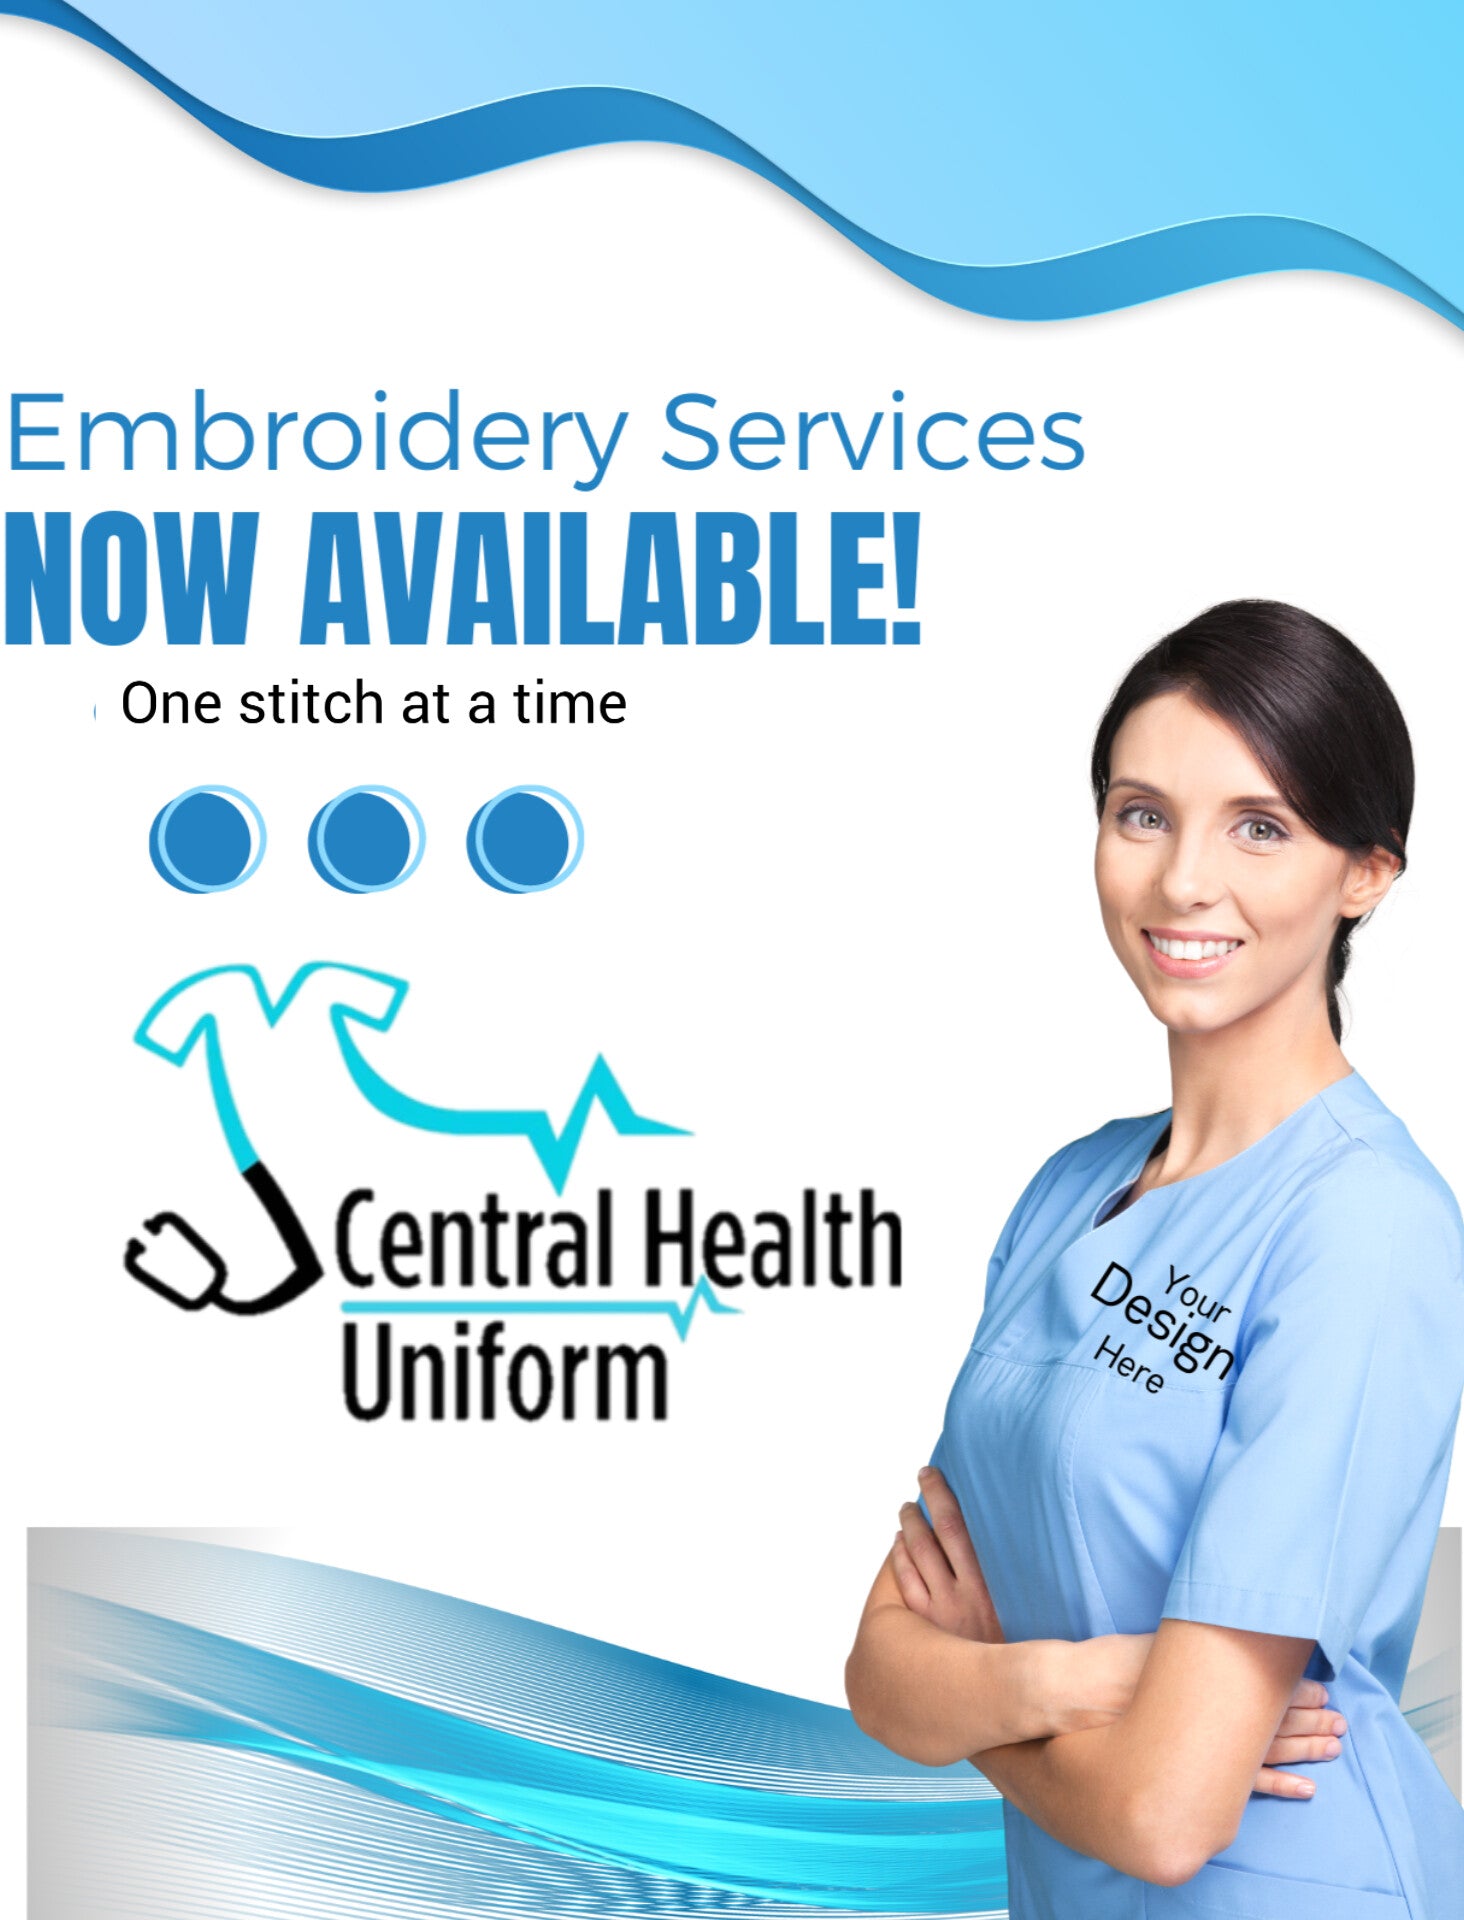 Custom Embroidery Services for Healthcare Uniform Scrubs